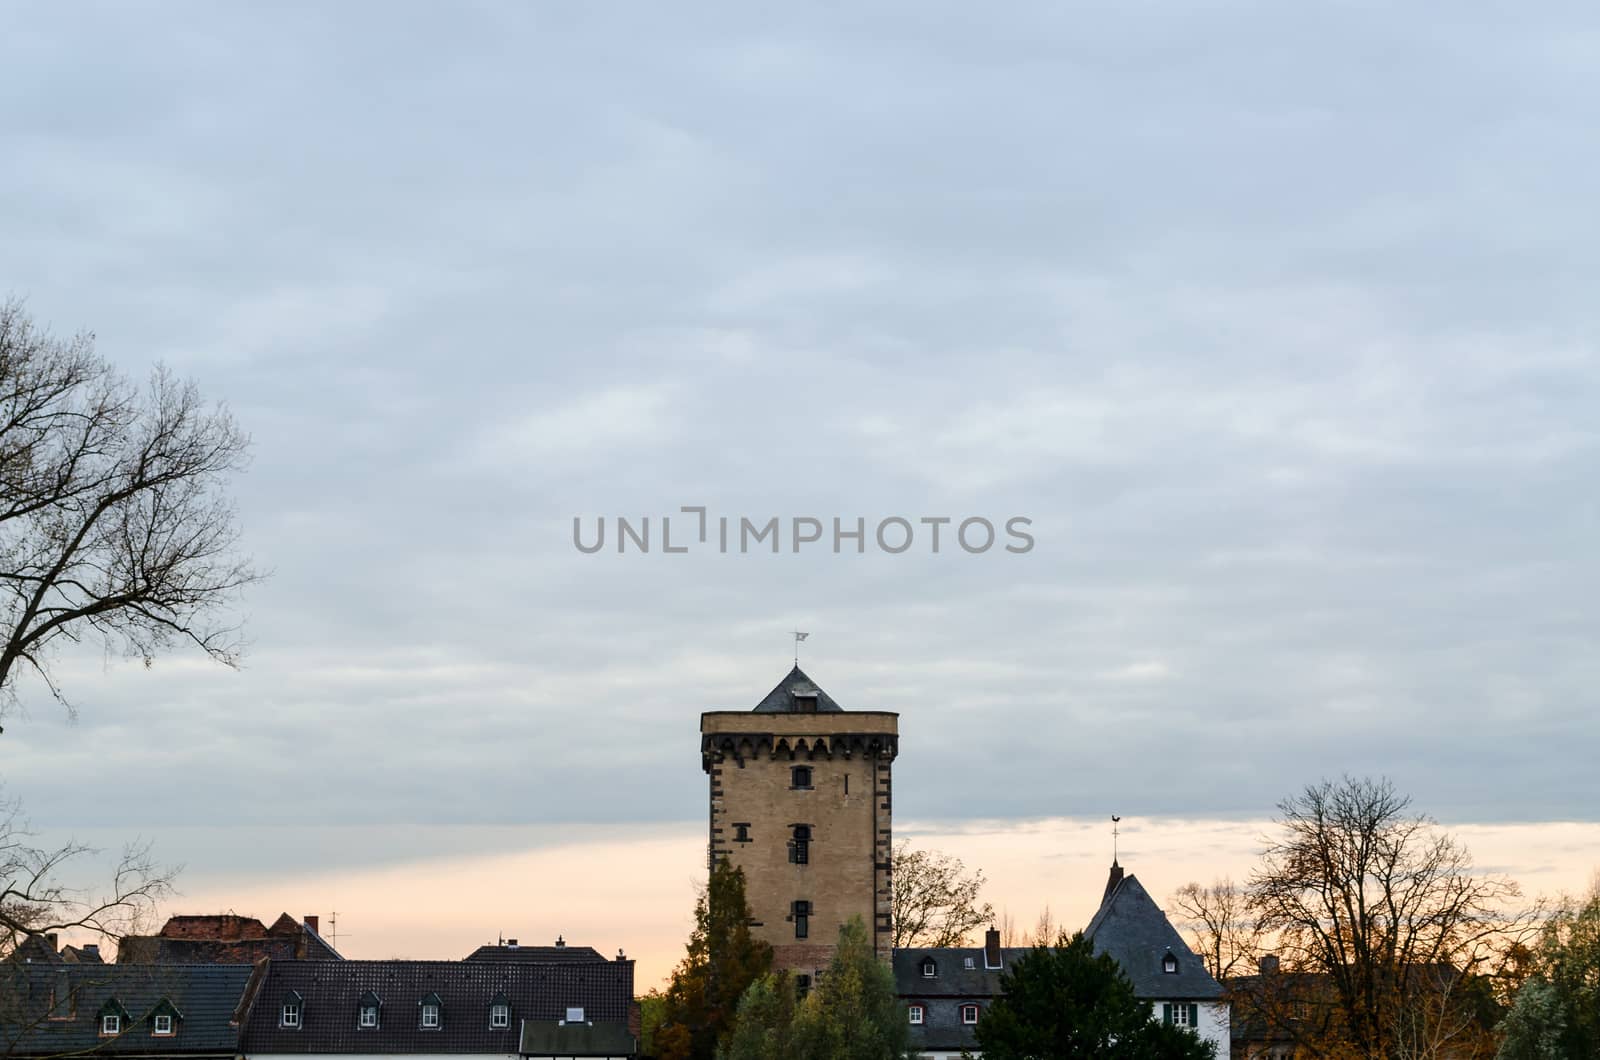 Skyline of the medieval fortress Zons in Germany.